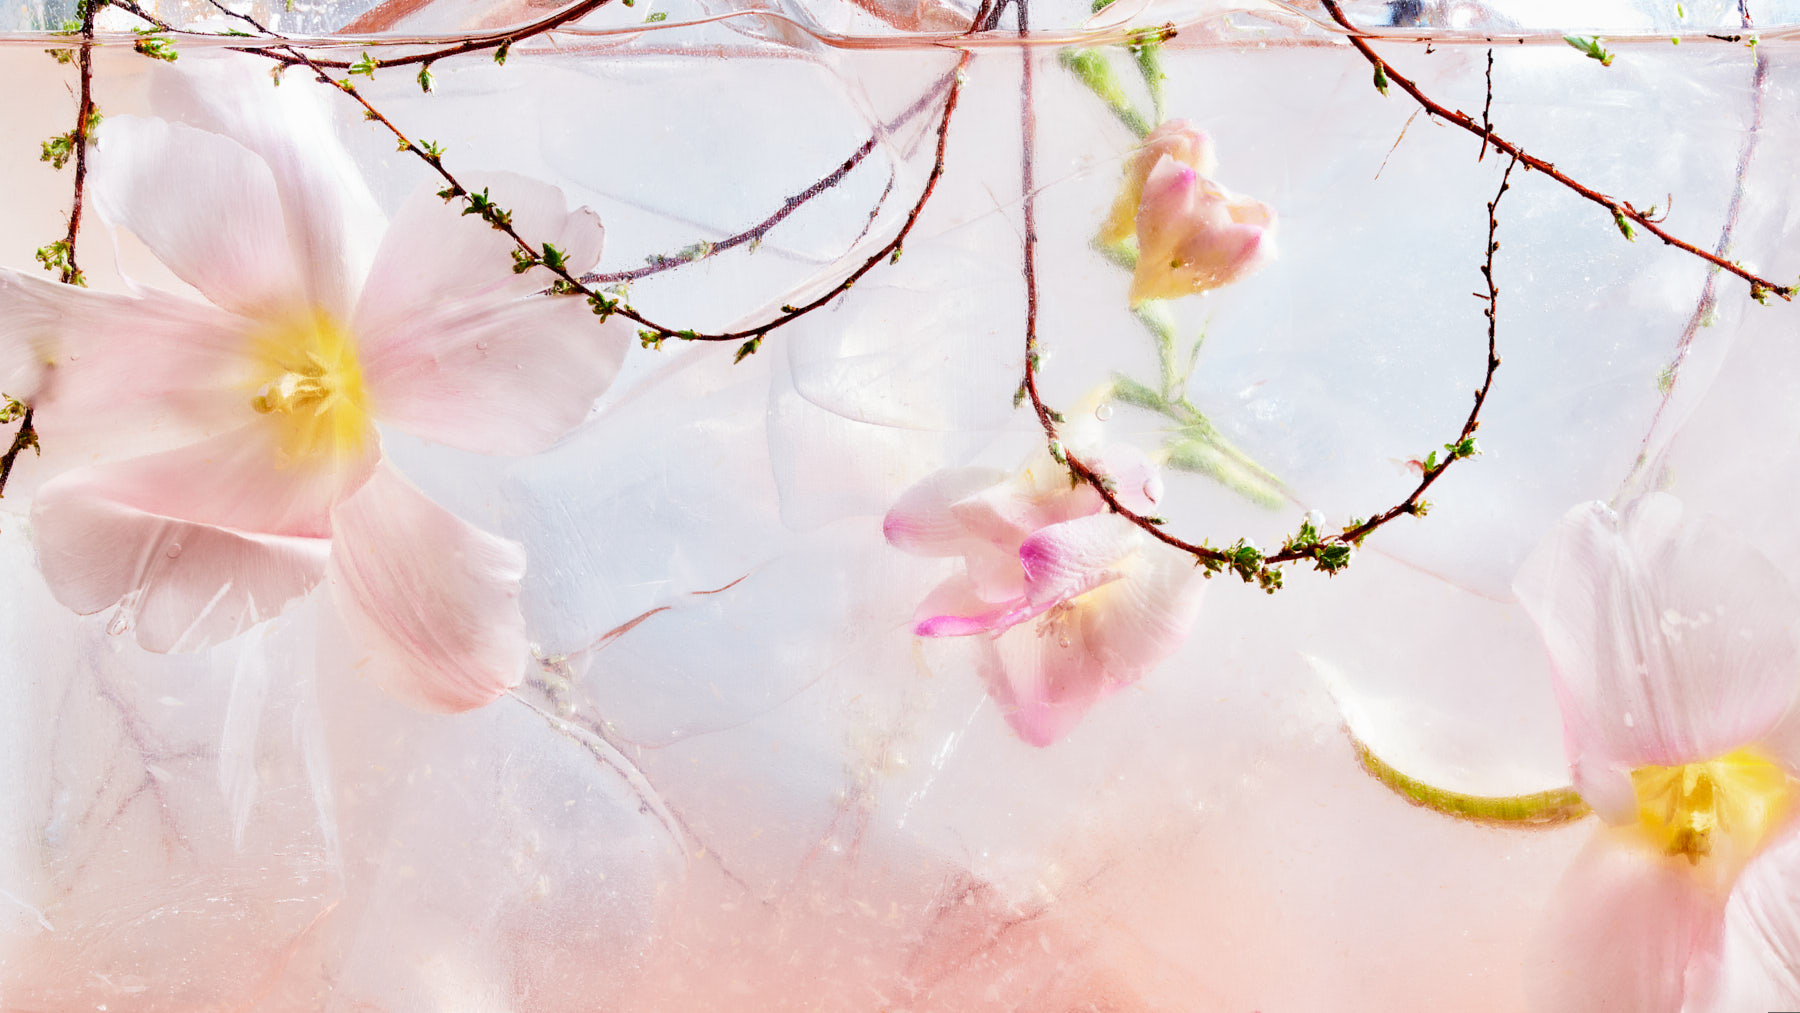 dreamy soft textured flowers in water